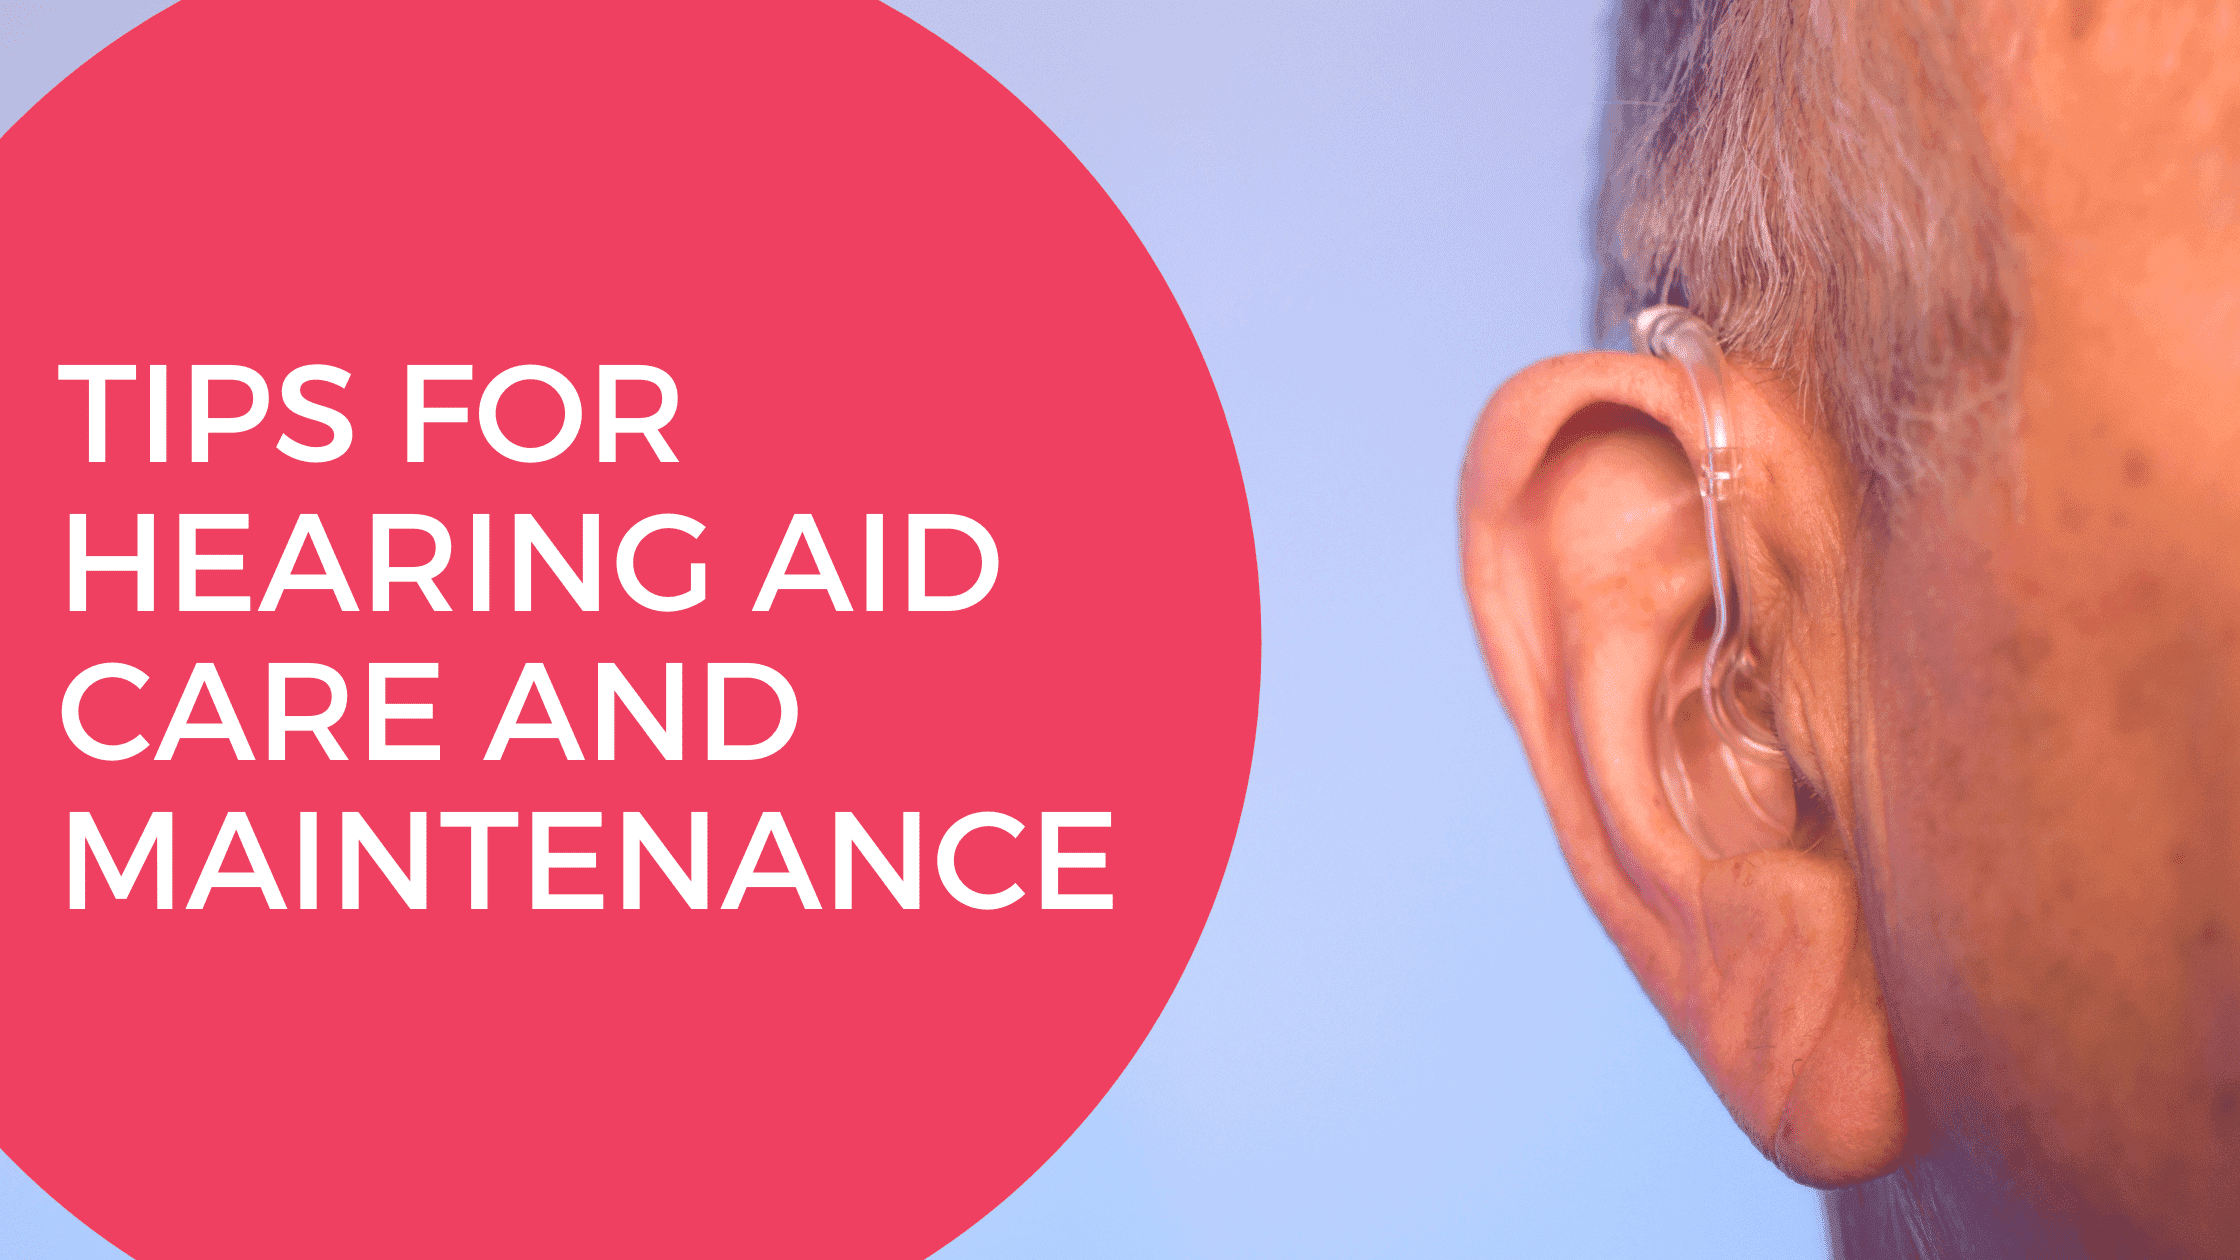 Tips for Hearing Aid Care and Maintenance